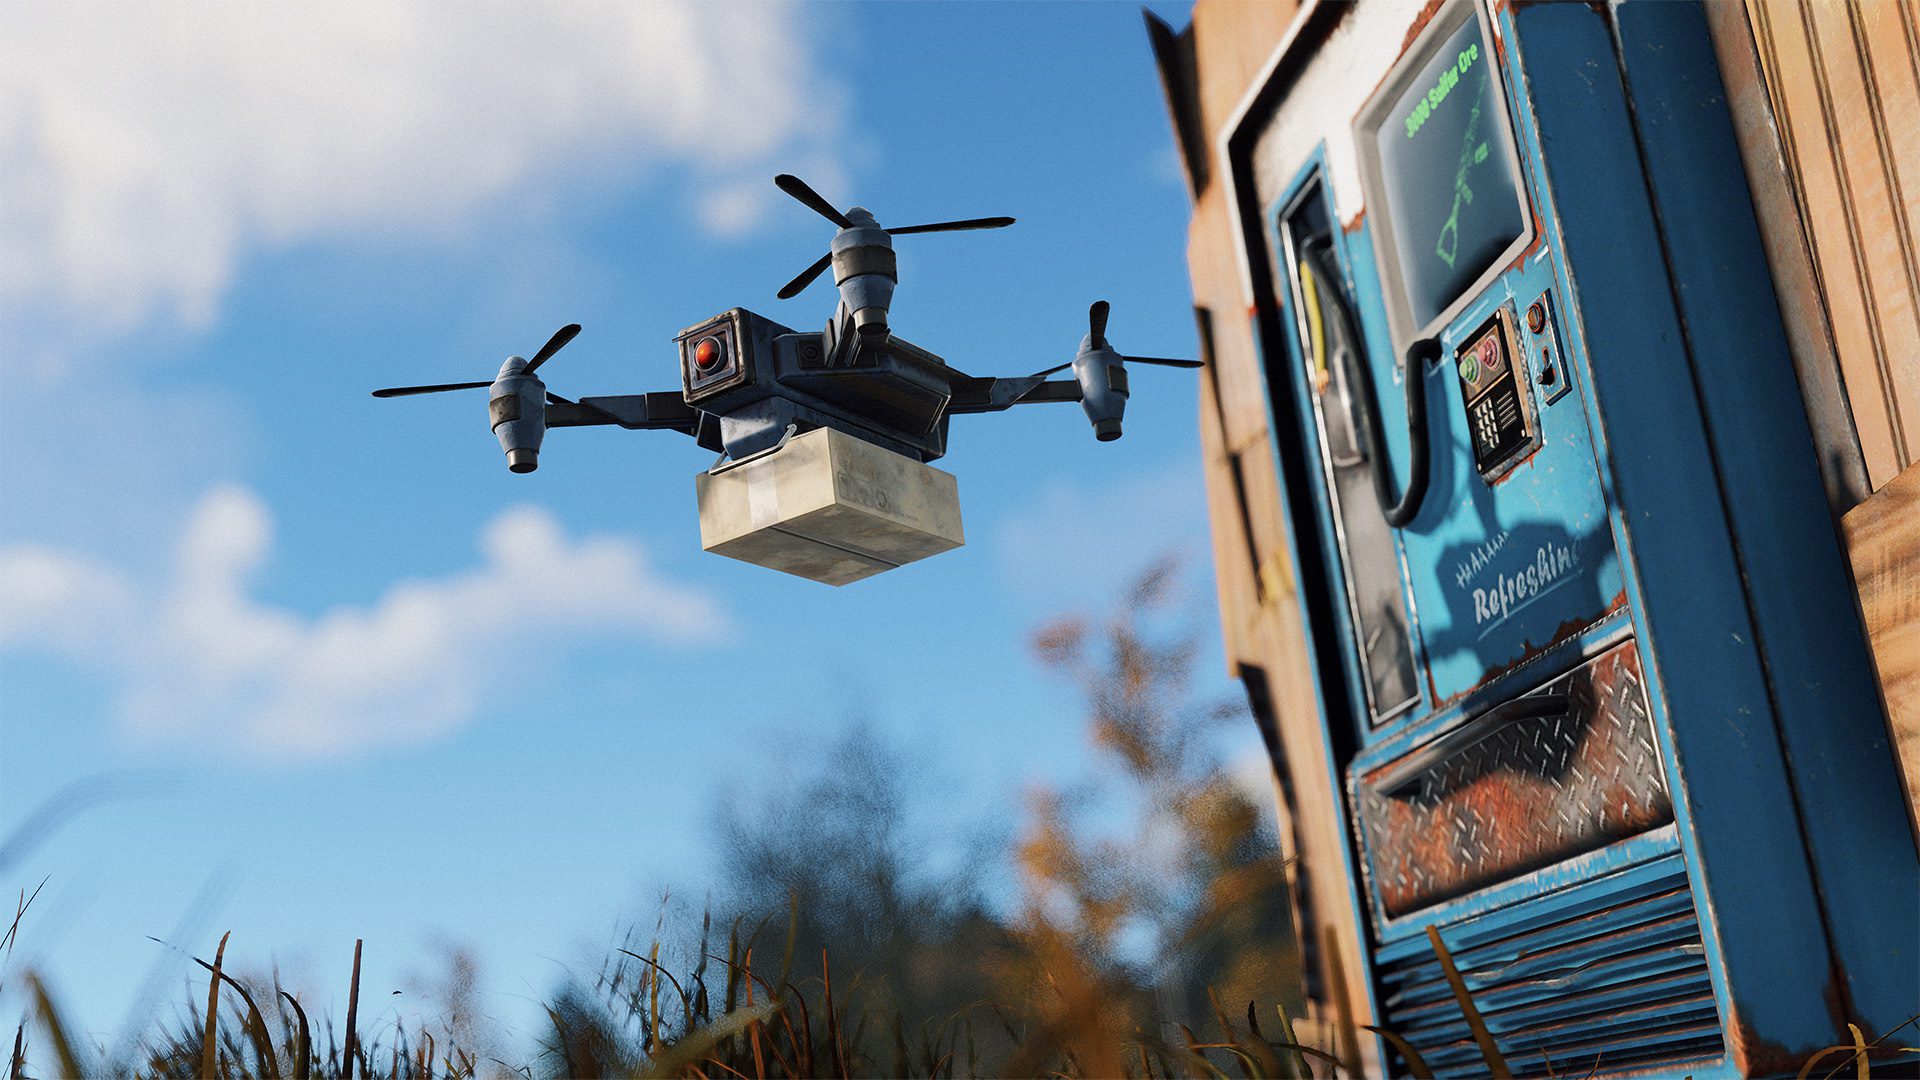 A vending machine delivery drone in Rust